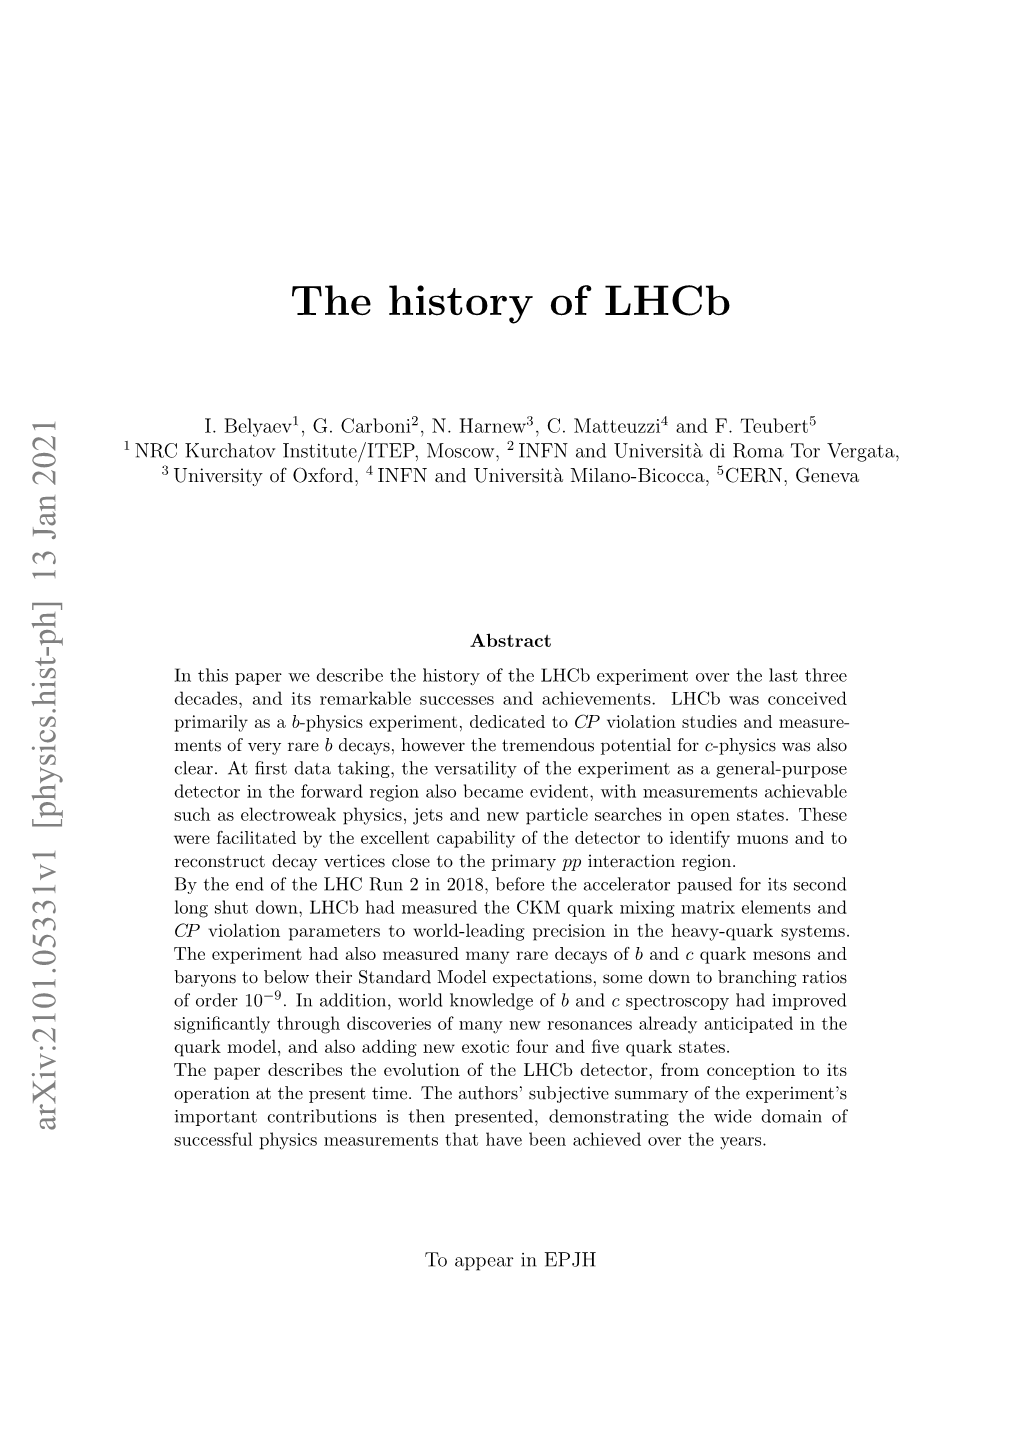 The History of Lhcb